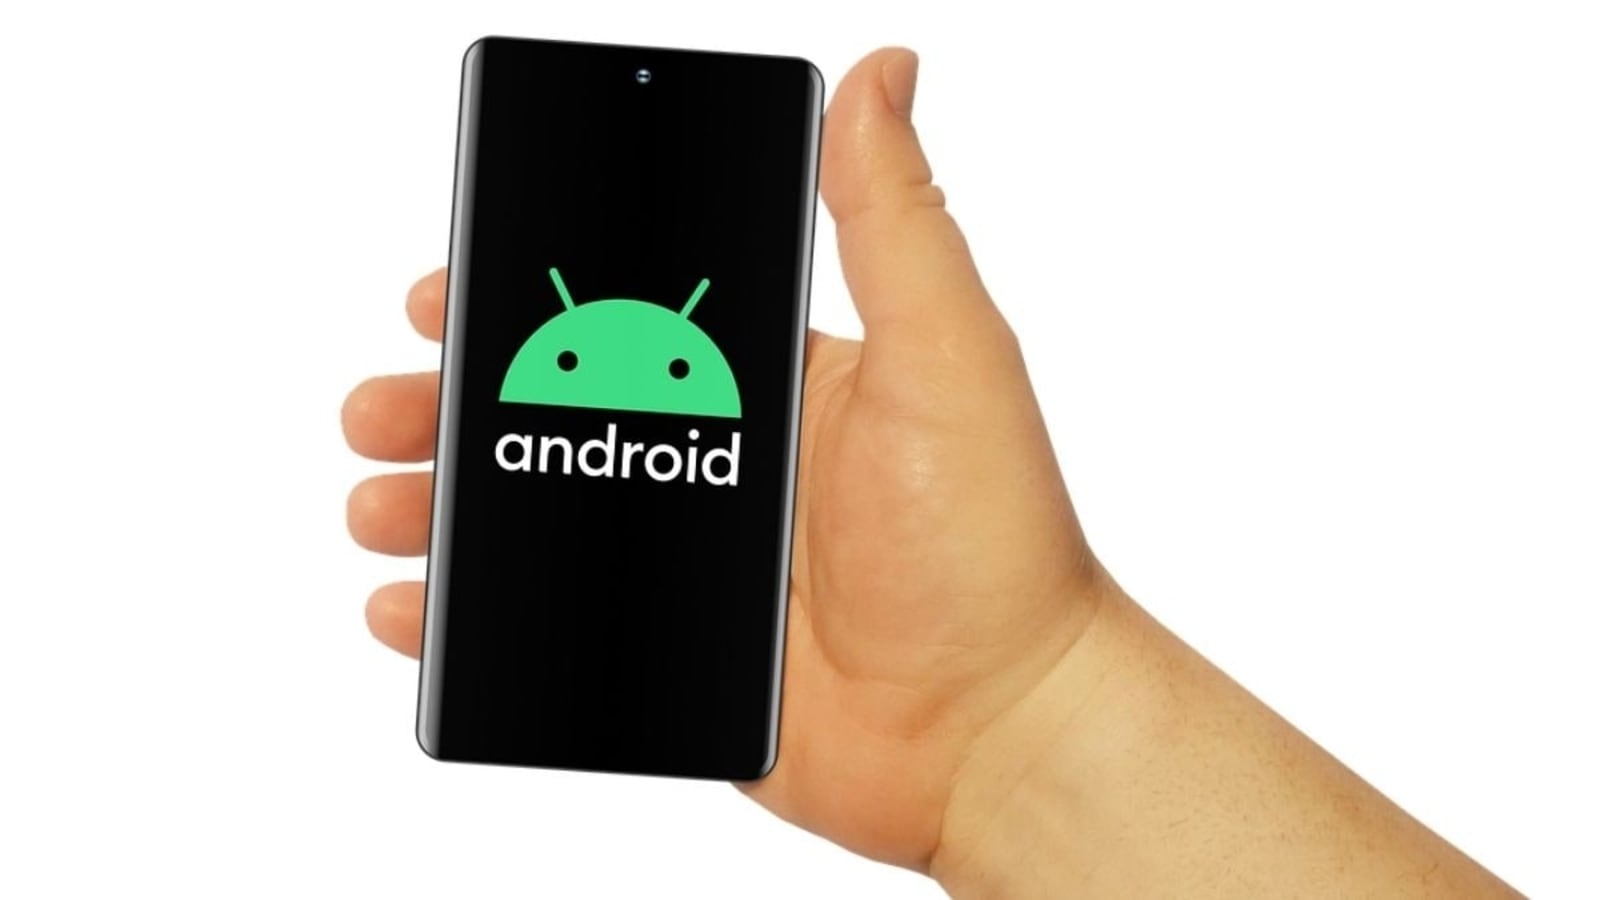 How to improve Android smartphone's performance - The Hindu